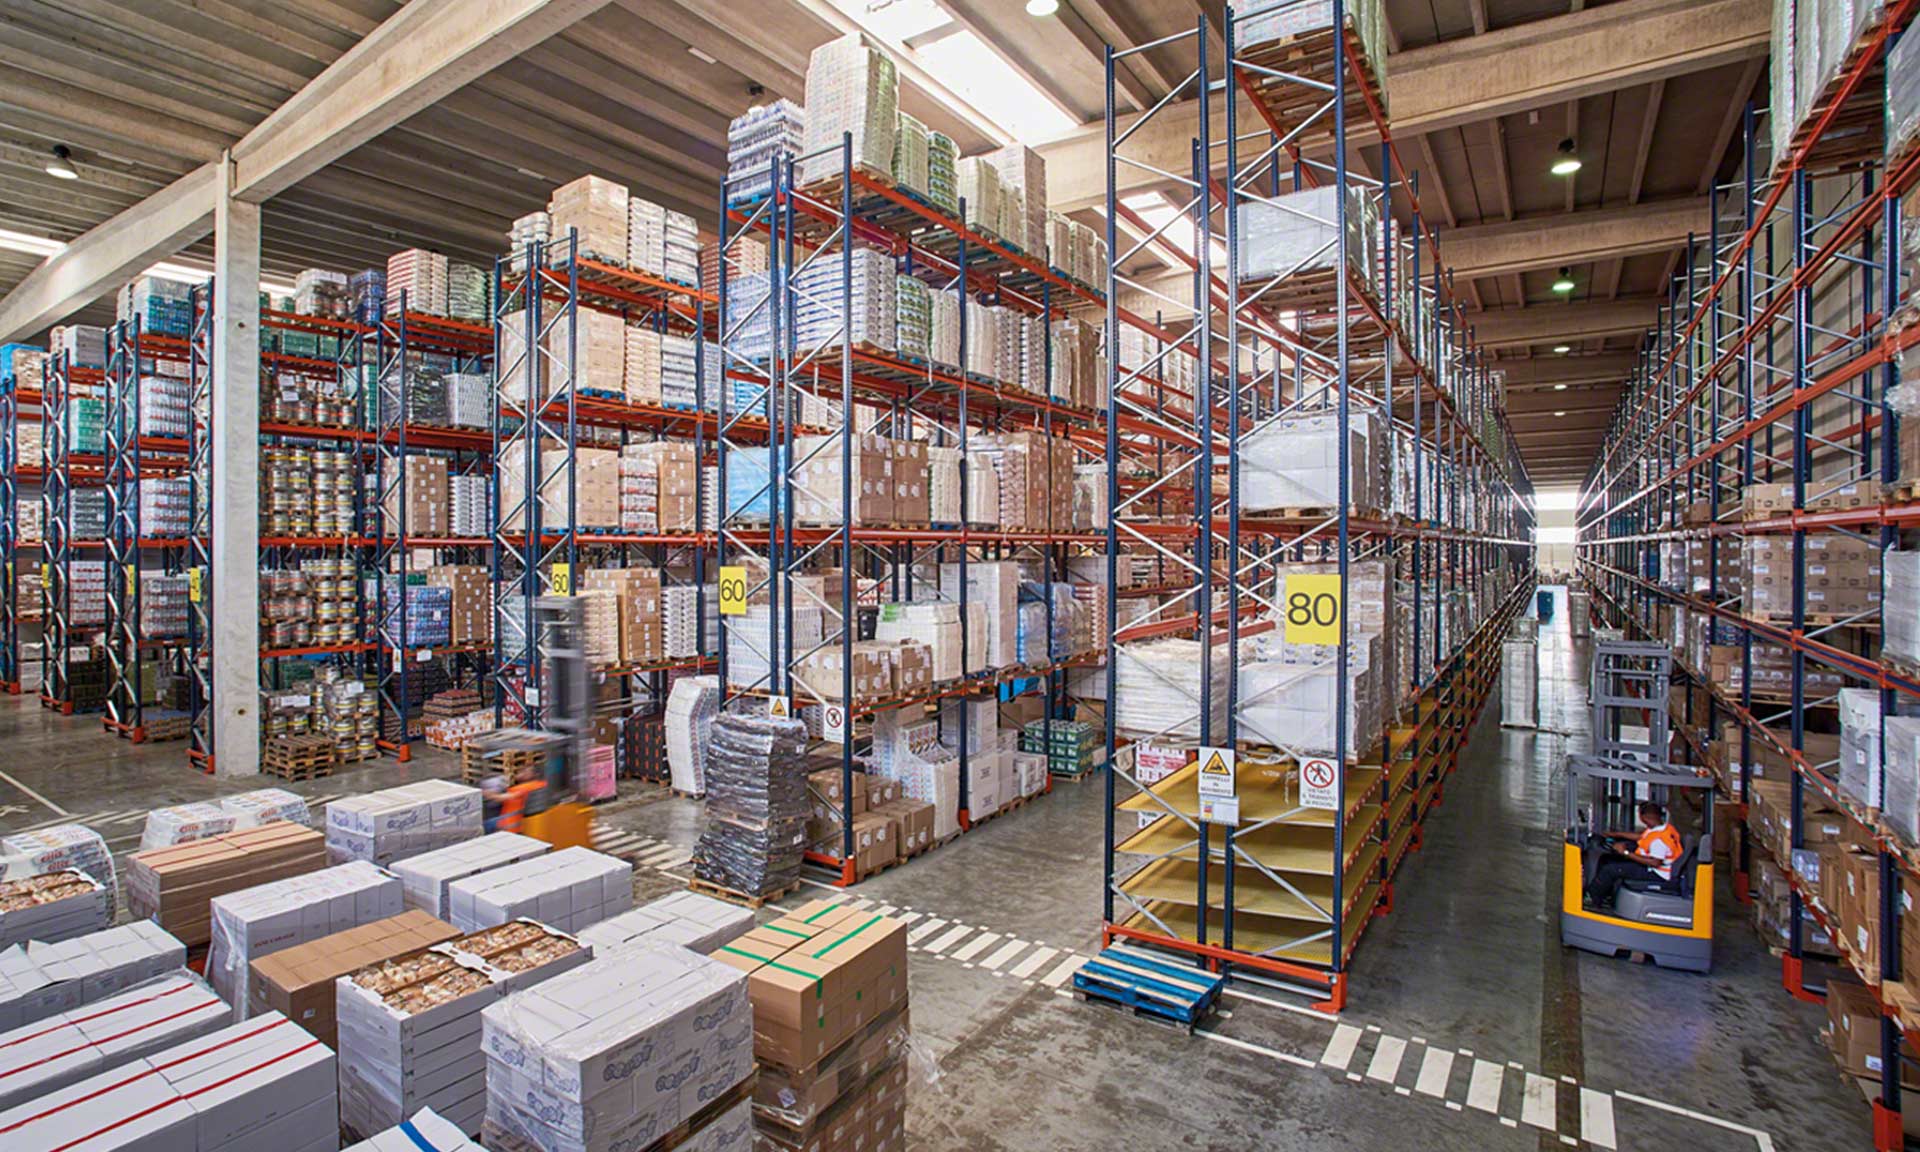 Warehouse storage techniques for efficient use of space